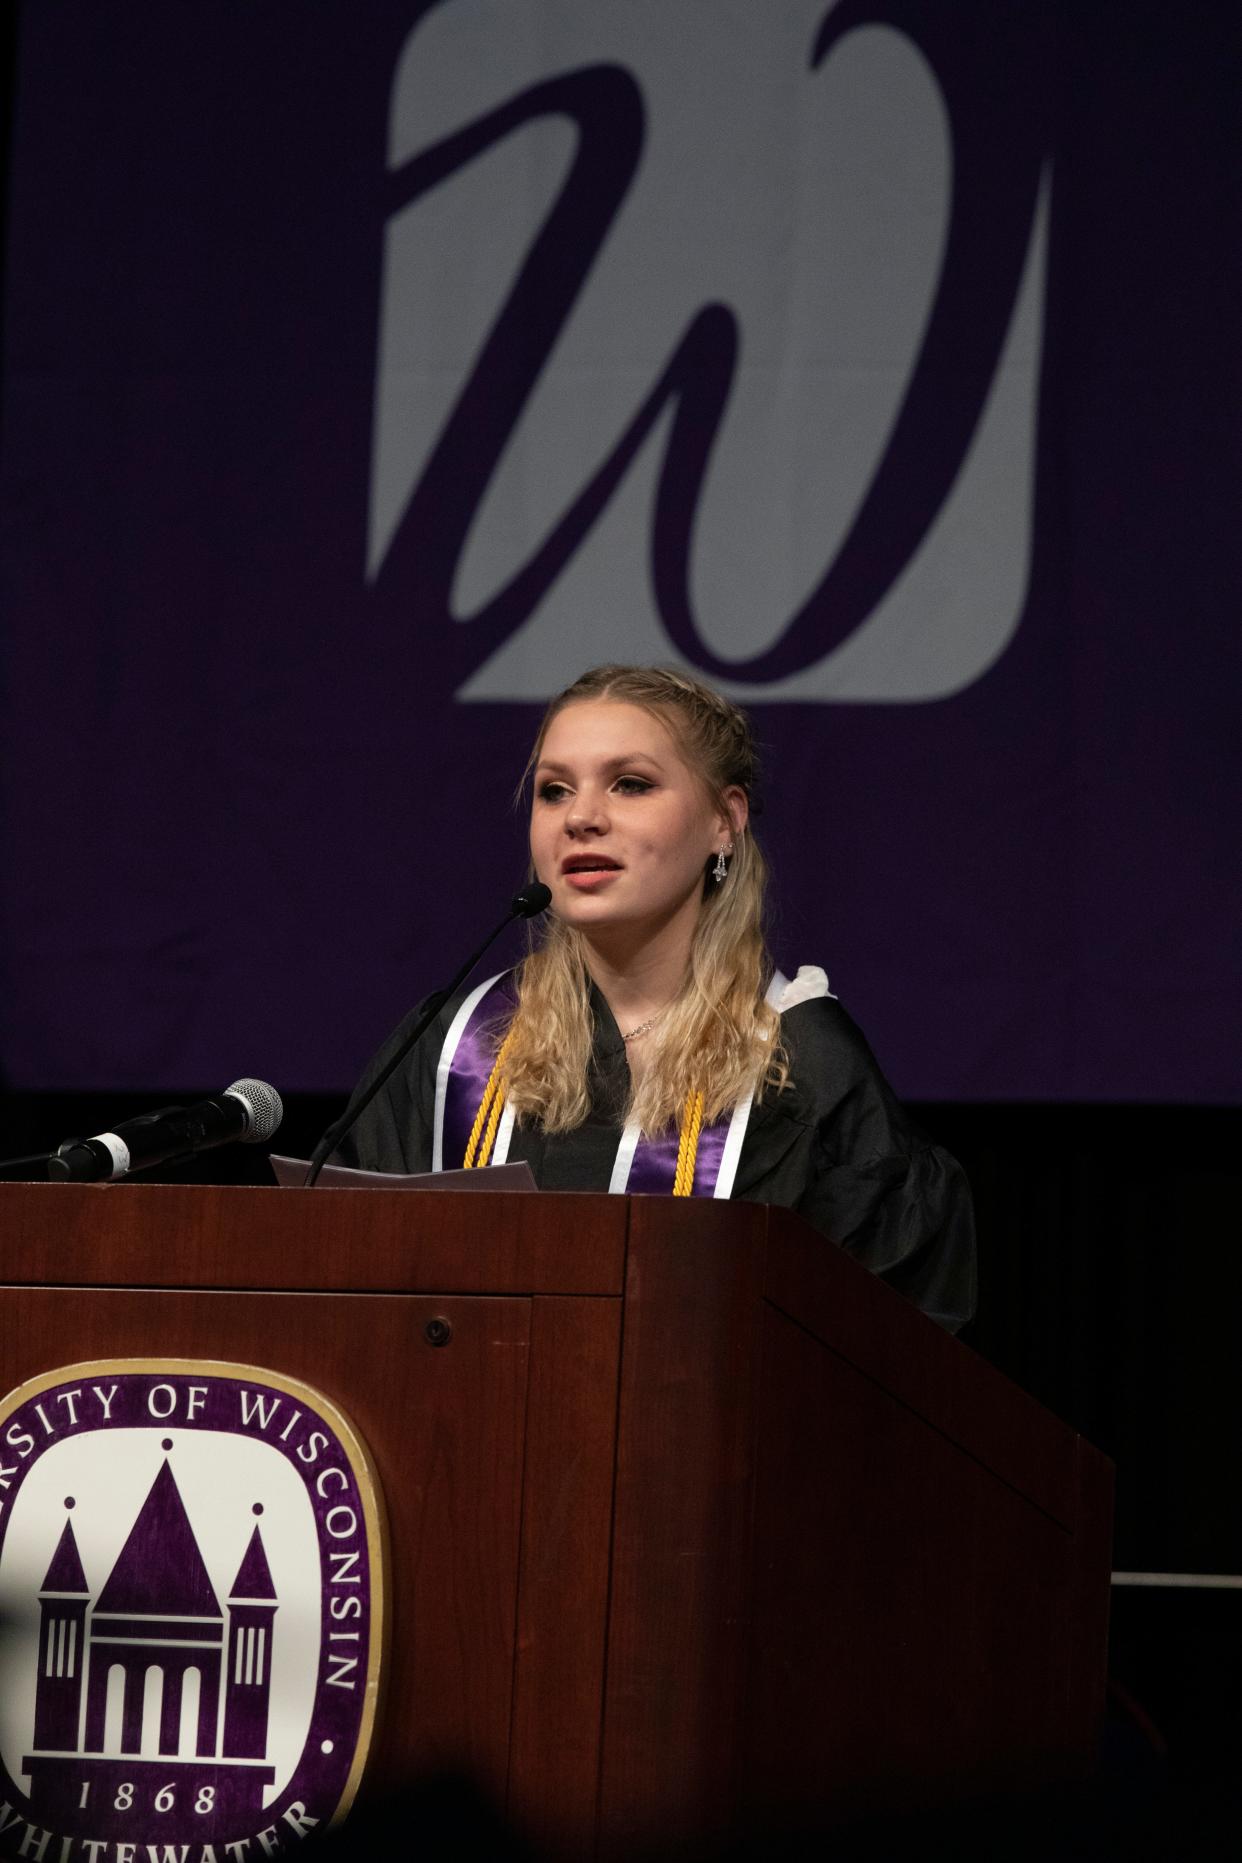 Hollyn Peterson was the student speaker at her college graduation at the University of Wisconsin-Whitewater. She survived cancer three times as a child and is now working toward an art career.